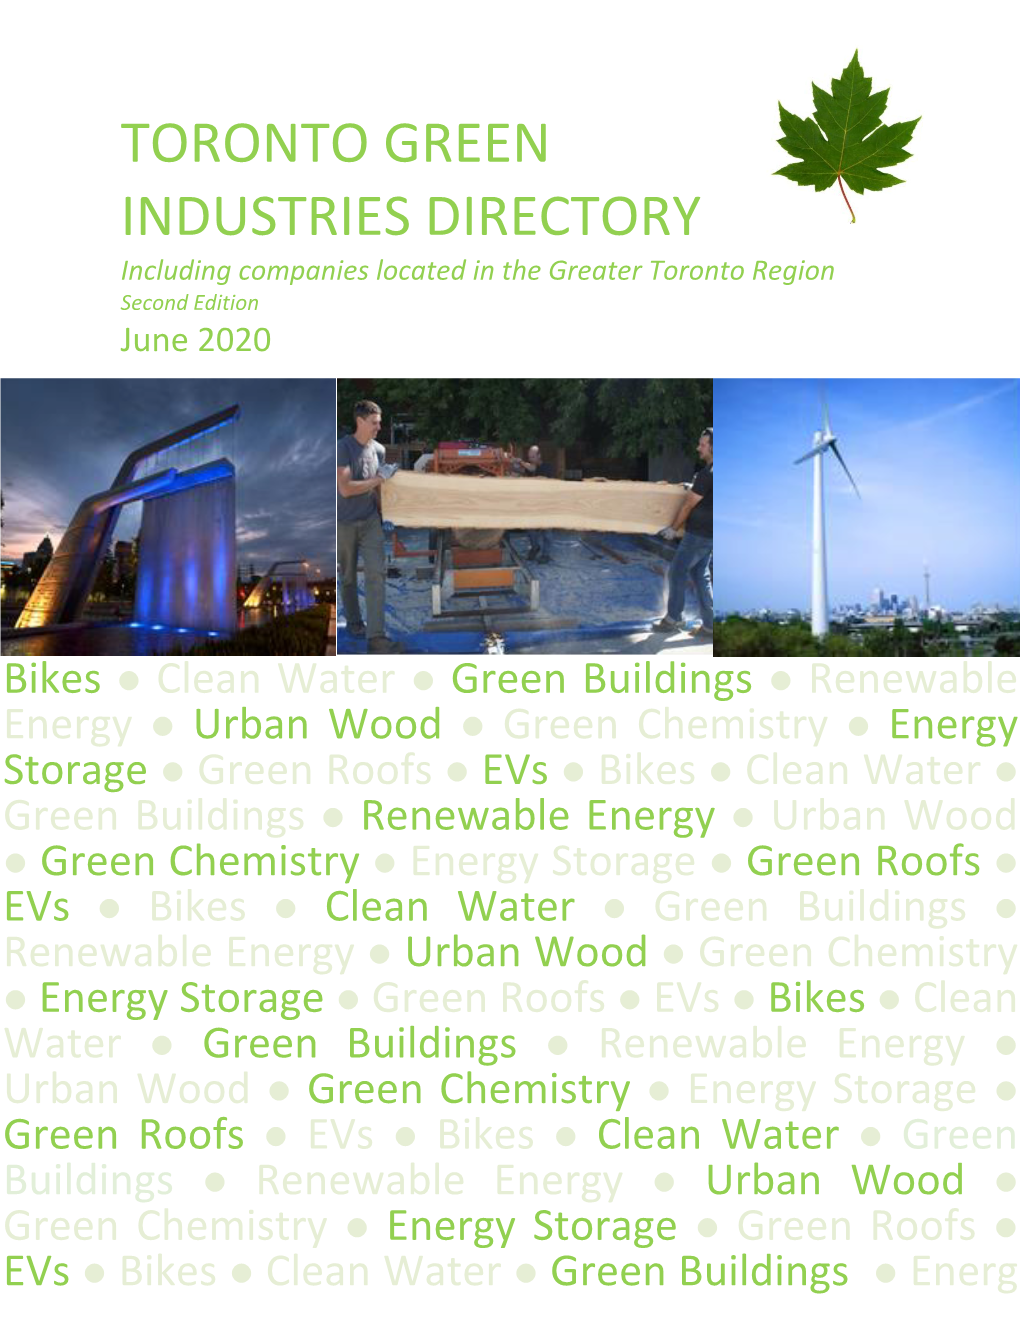 TORONTO GREEN INDUSTRIES DIRECTORY Including Companies Located in the Greater Toronto Region Second Edition June 2020